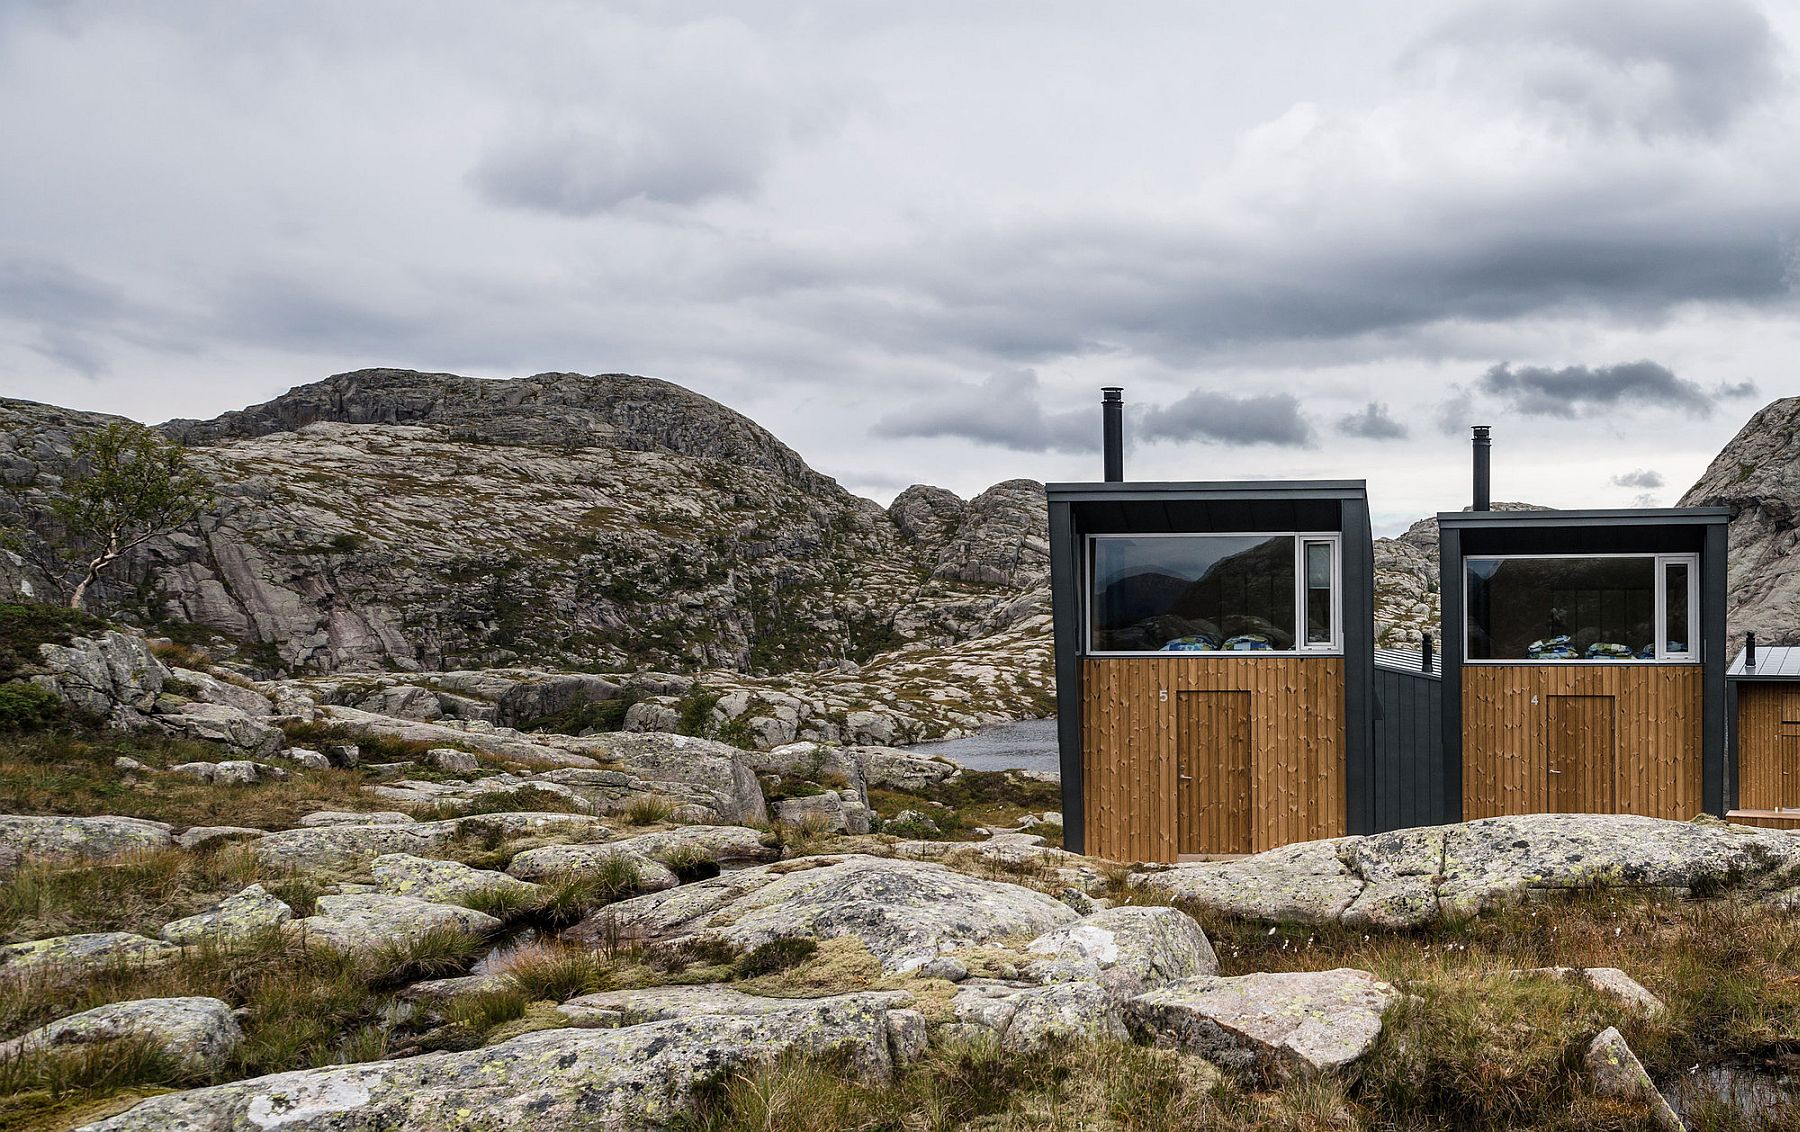 Rolled zinc and wood shape the exterior of the cabins